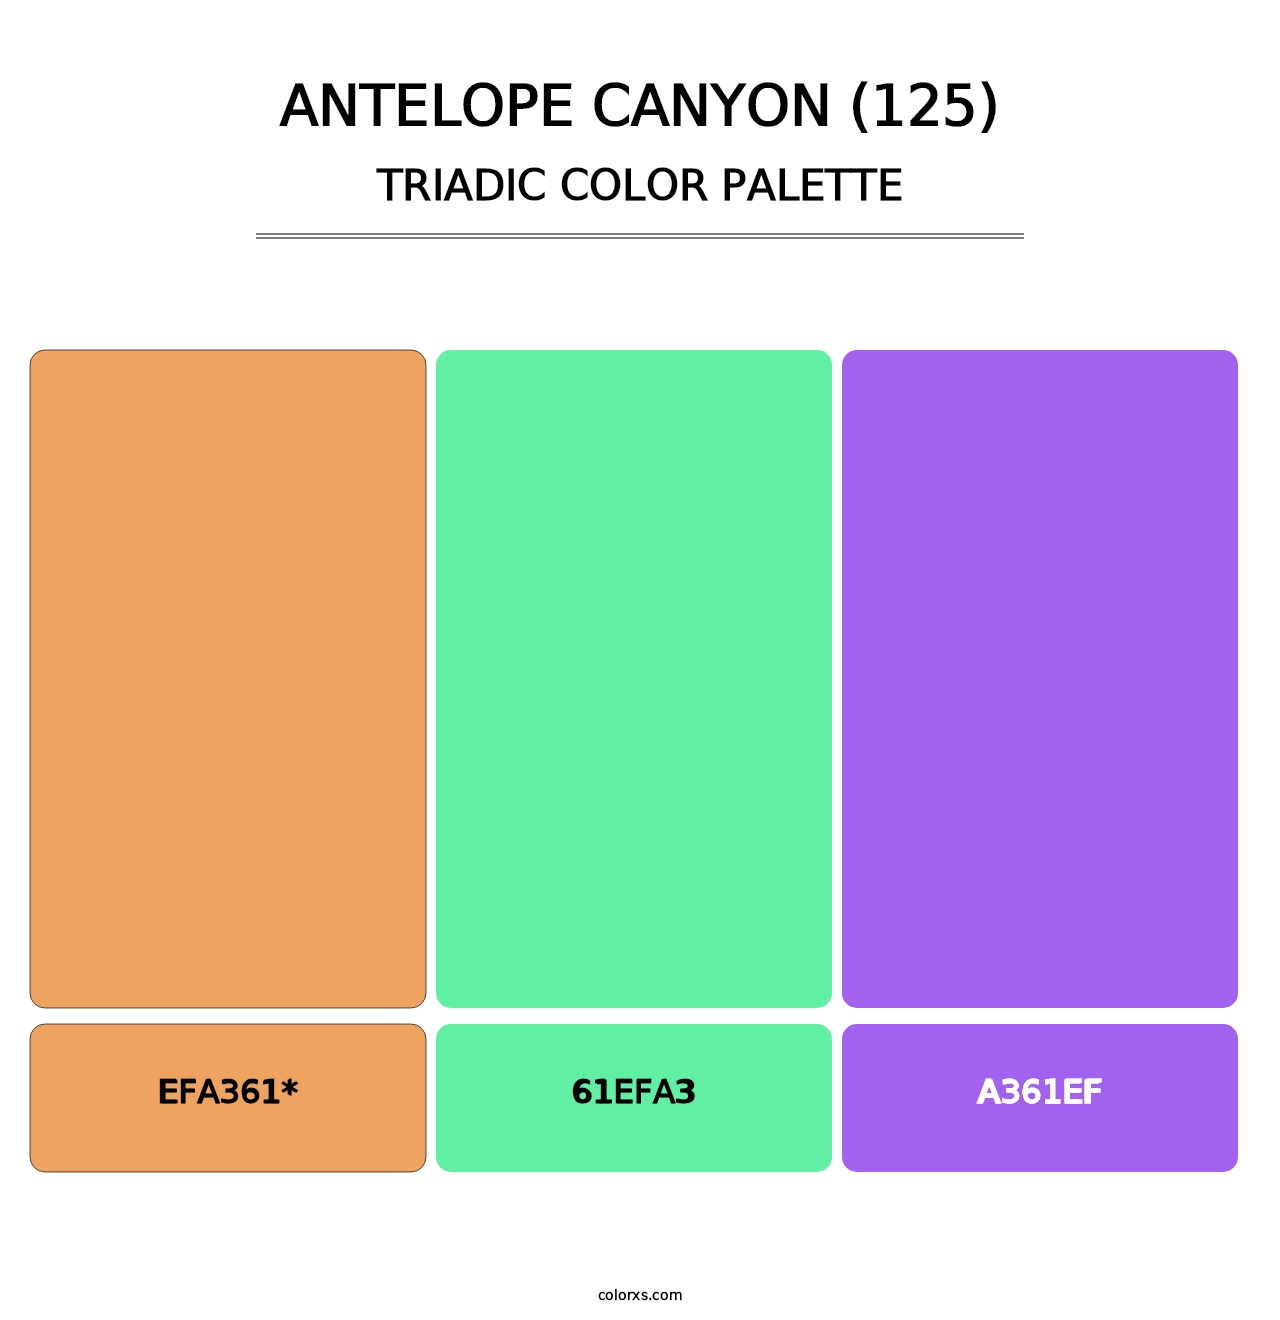 Antelope Canyon (125) - Triadic Color Palette